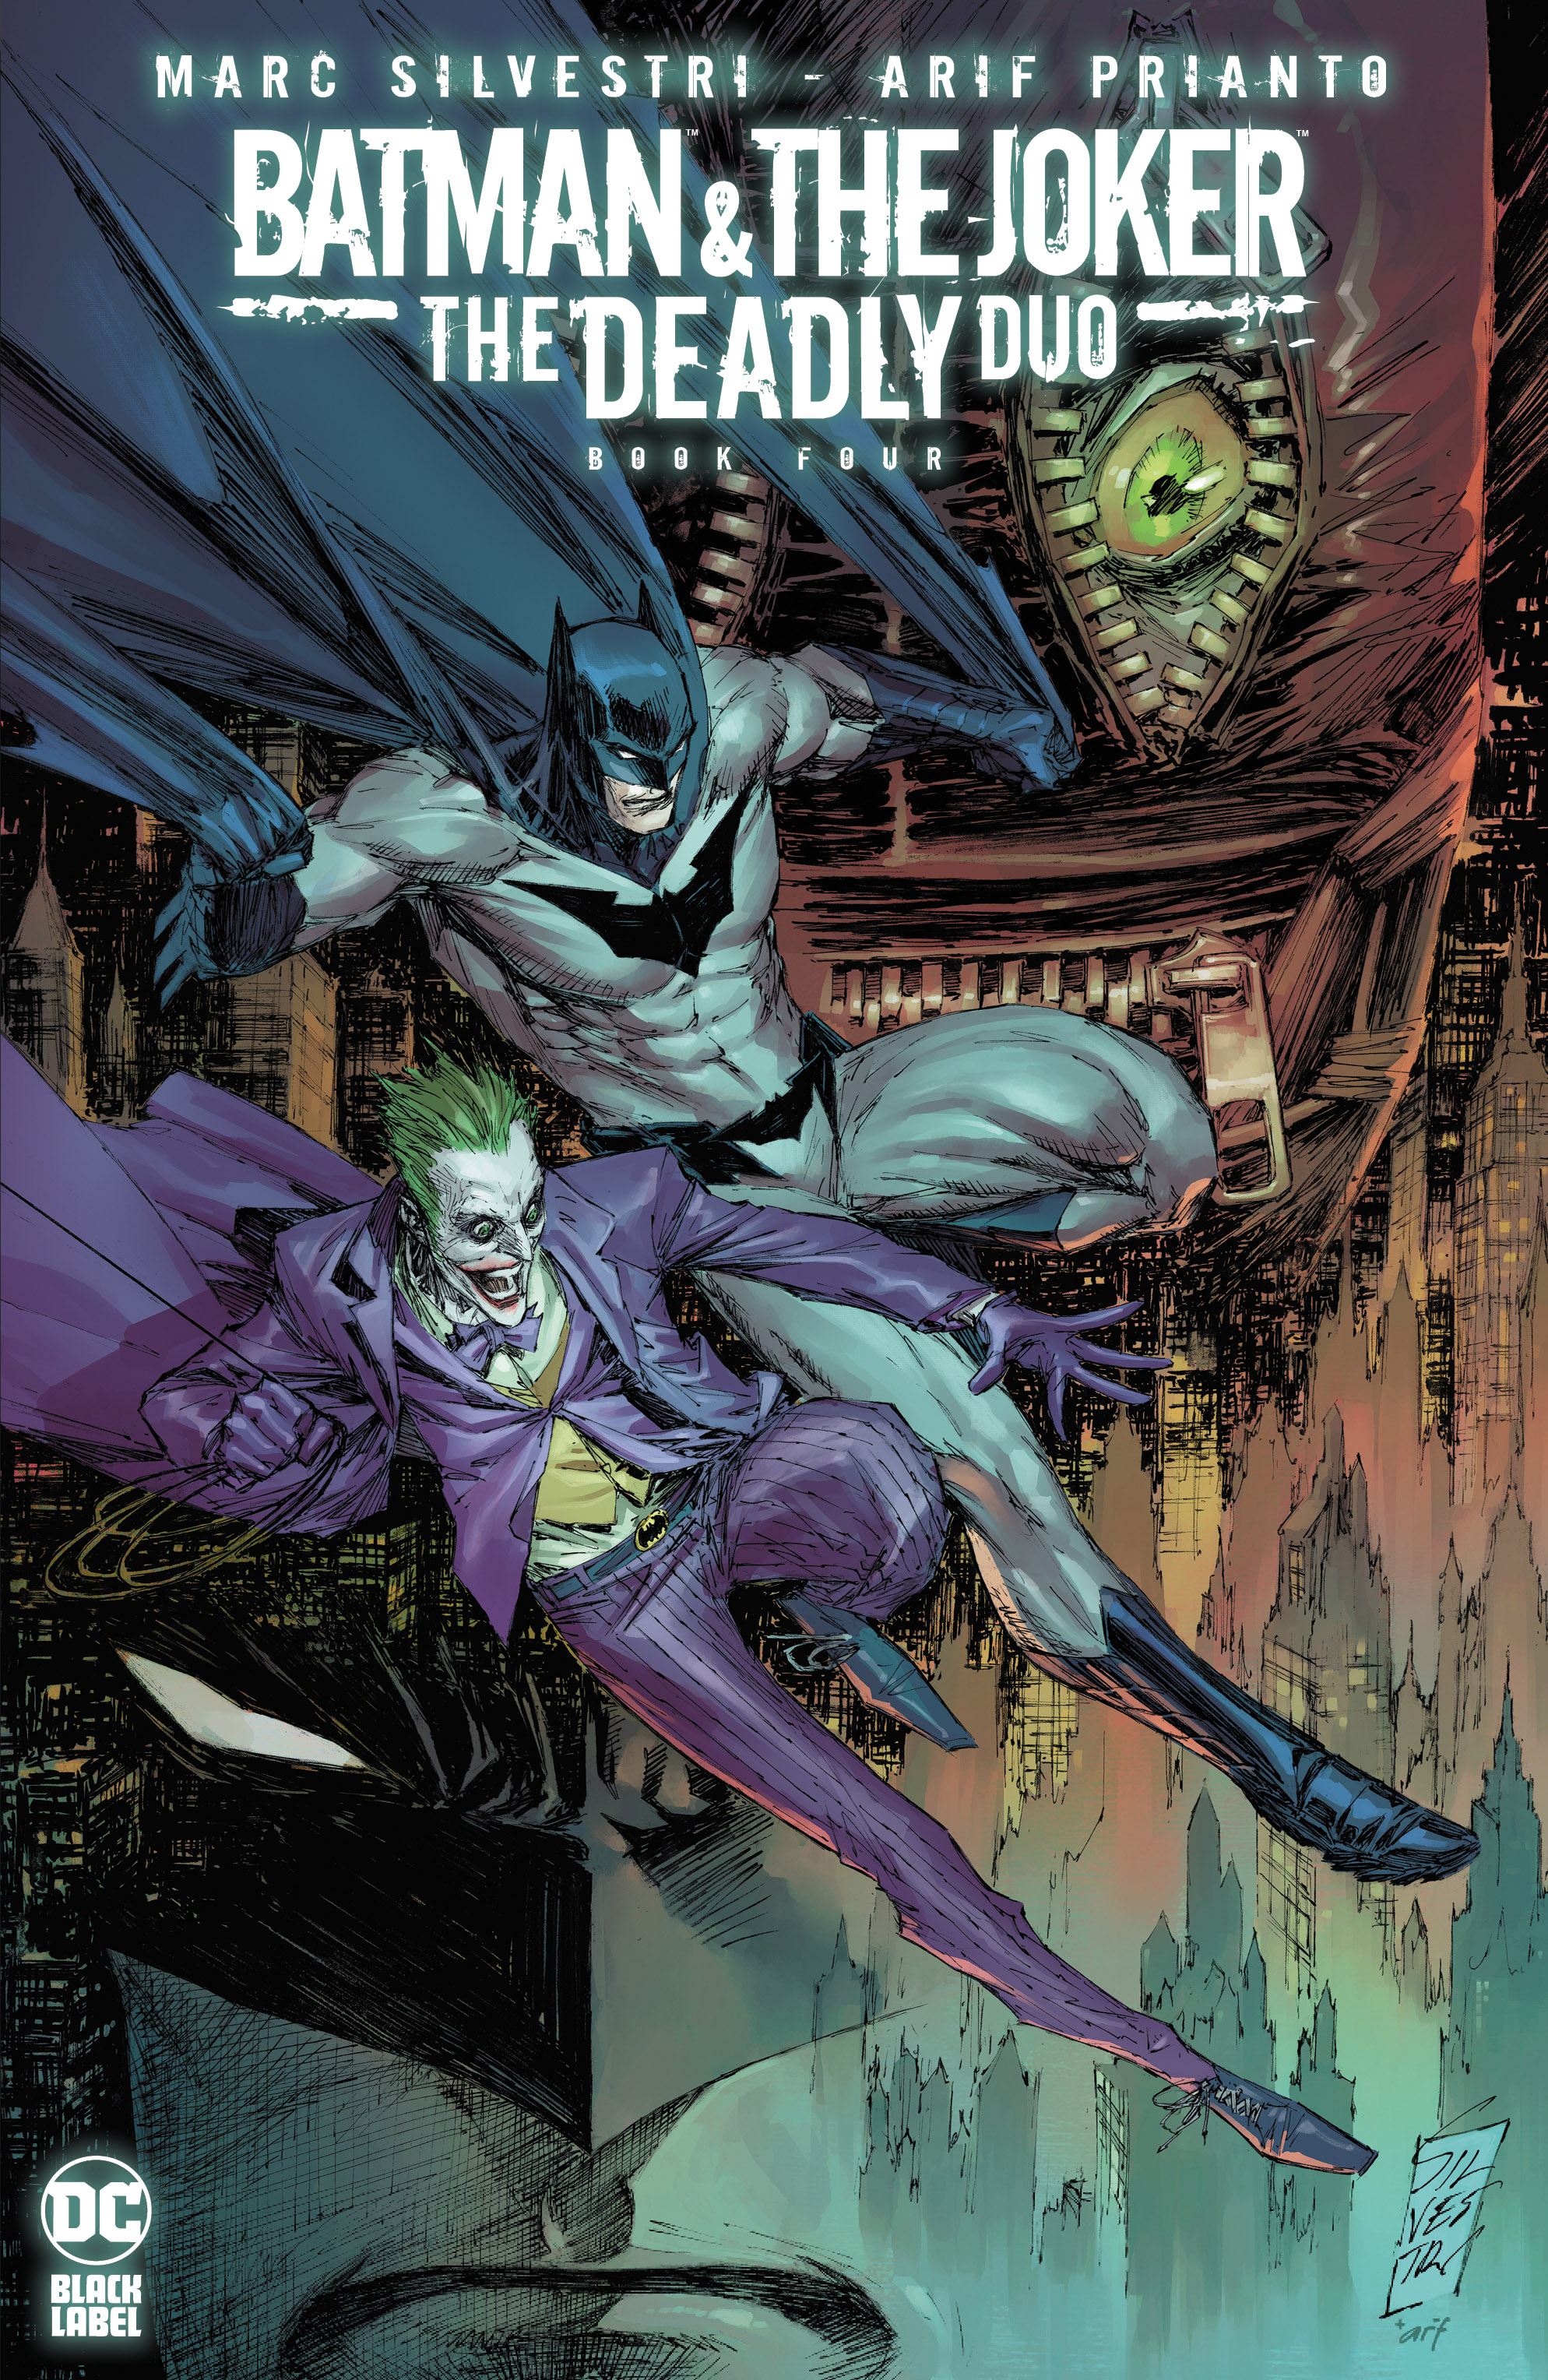 Batman & The Joker The Deadly Duo #4 Cover A Marc Silvestri (Mature) (Of 7)